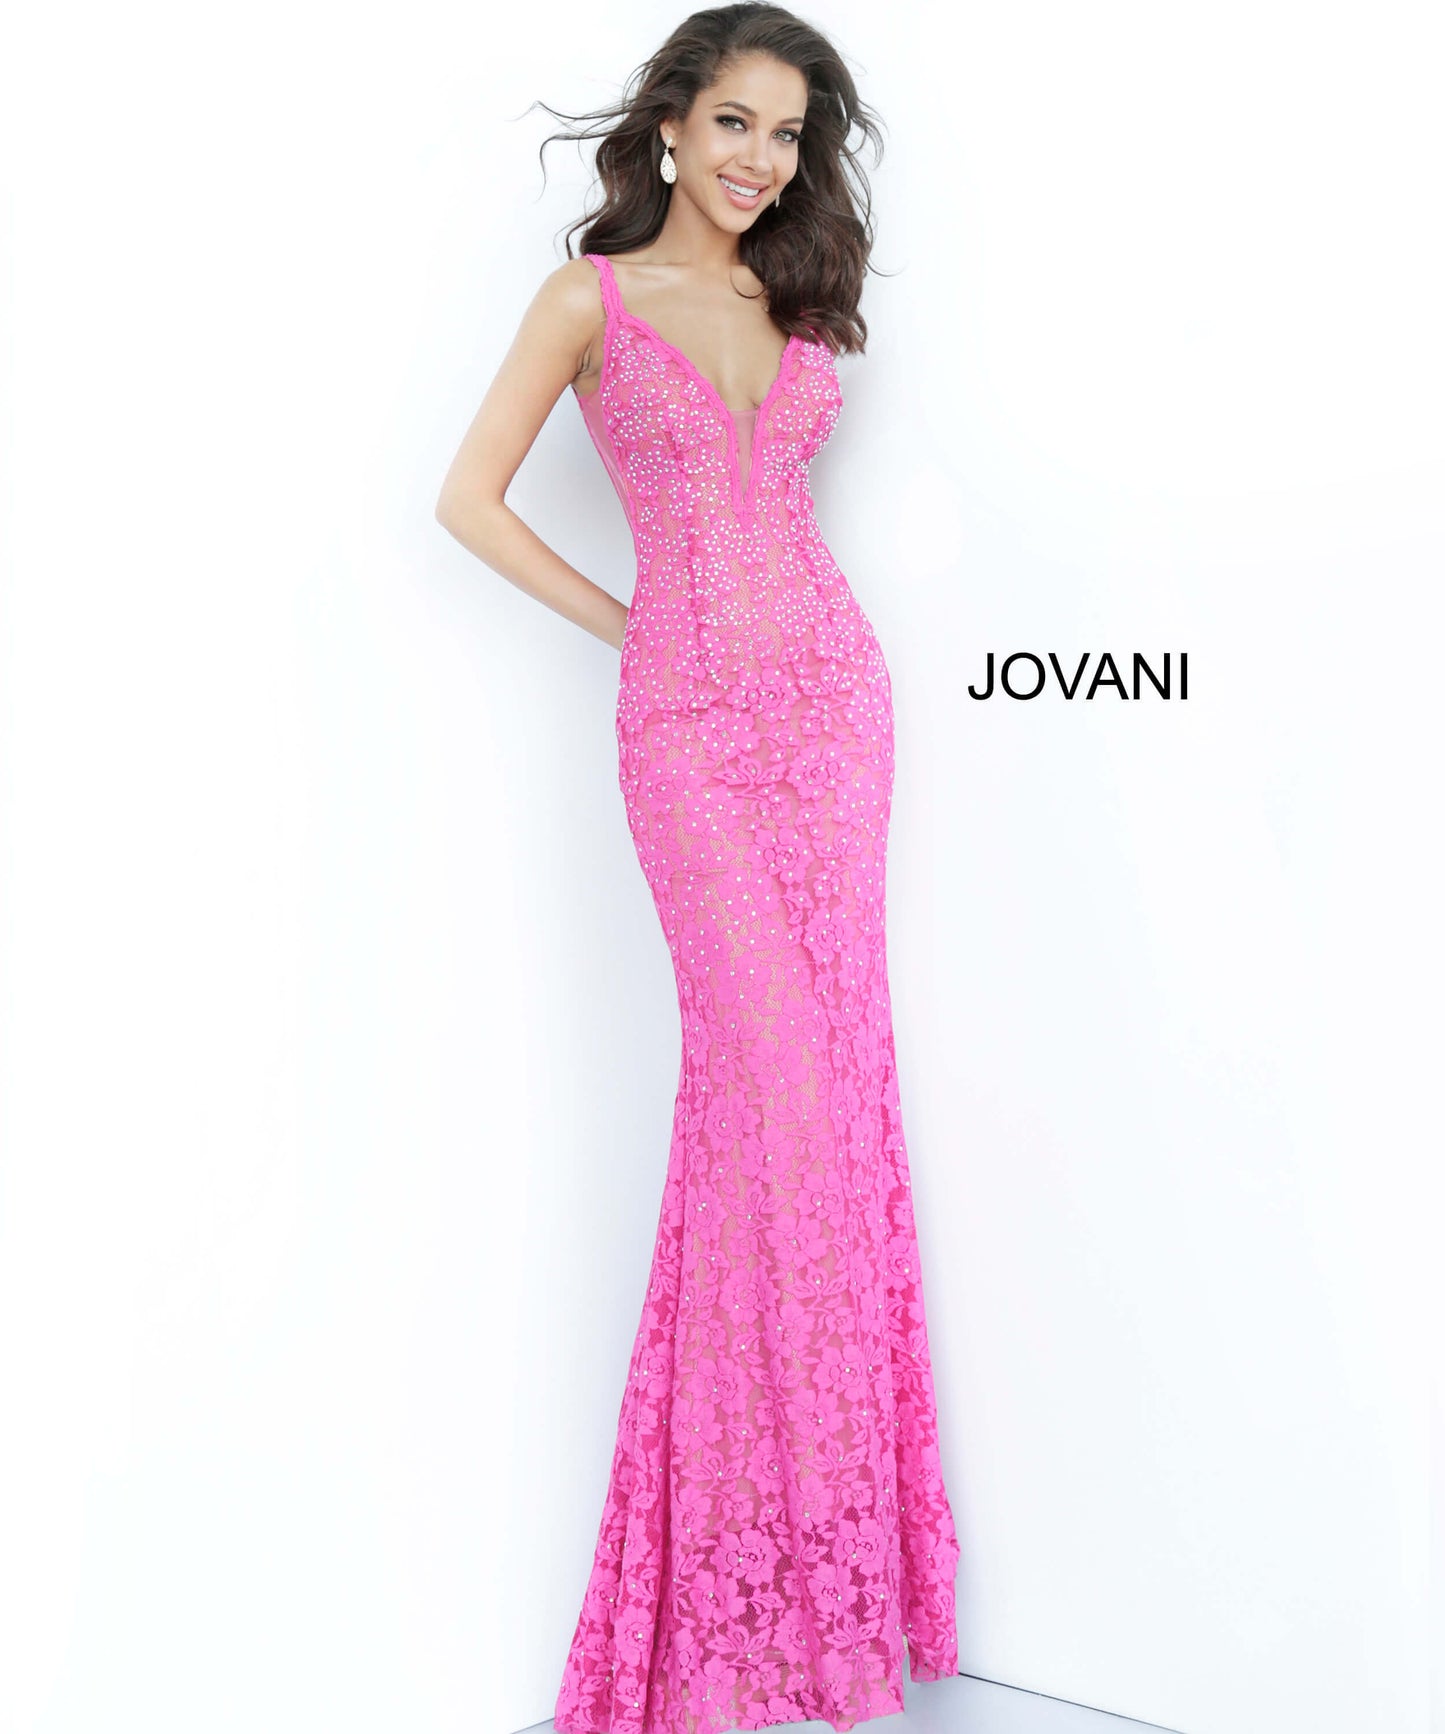 Jovani 48994 Stretch lace prom dress embellished with heat set stones, nude underlay, fitted silhouette, straps over shoulders, plunging v neckline with sheer mesh, sheer mesh inserts along the sides, sweeping train, low v back. Makes an excellent pageant gown or evening gown.   Available colors:  black, bright pink, emerald, fuchsia, grey, light-blue, light-pink, lilac, navy, peach, periwinkle, red, white  Available sizes:   00, 0, 2, 4, 6, 8, 10, 12, 14, 16, 18, 20, 22, 24